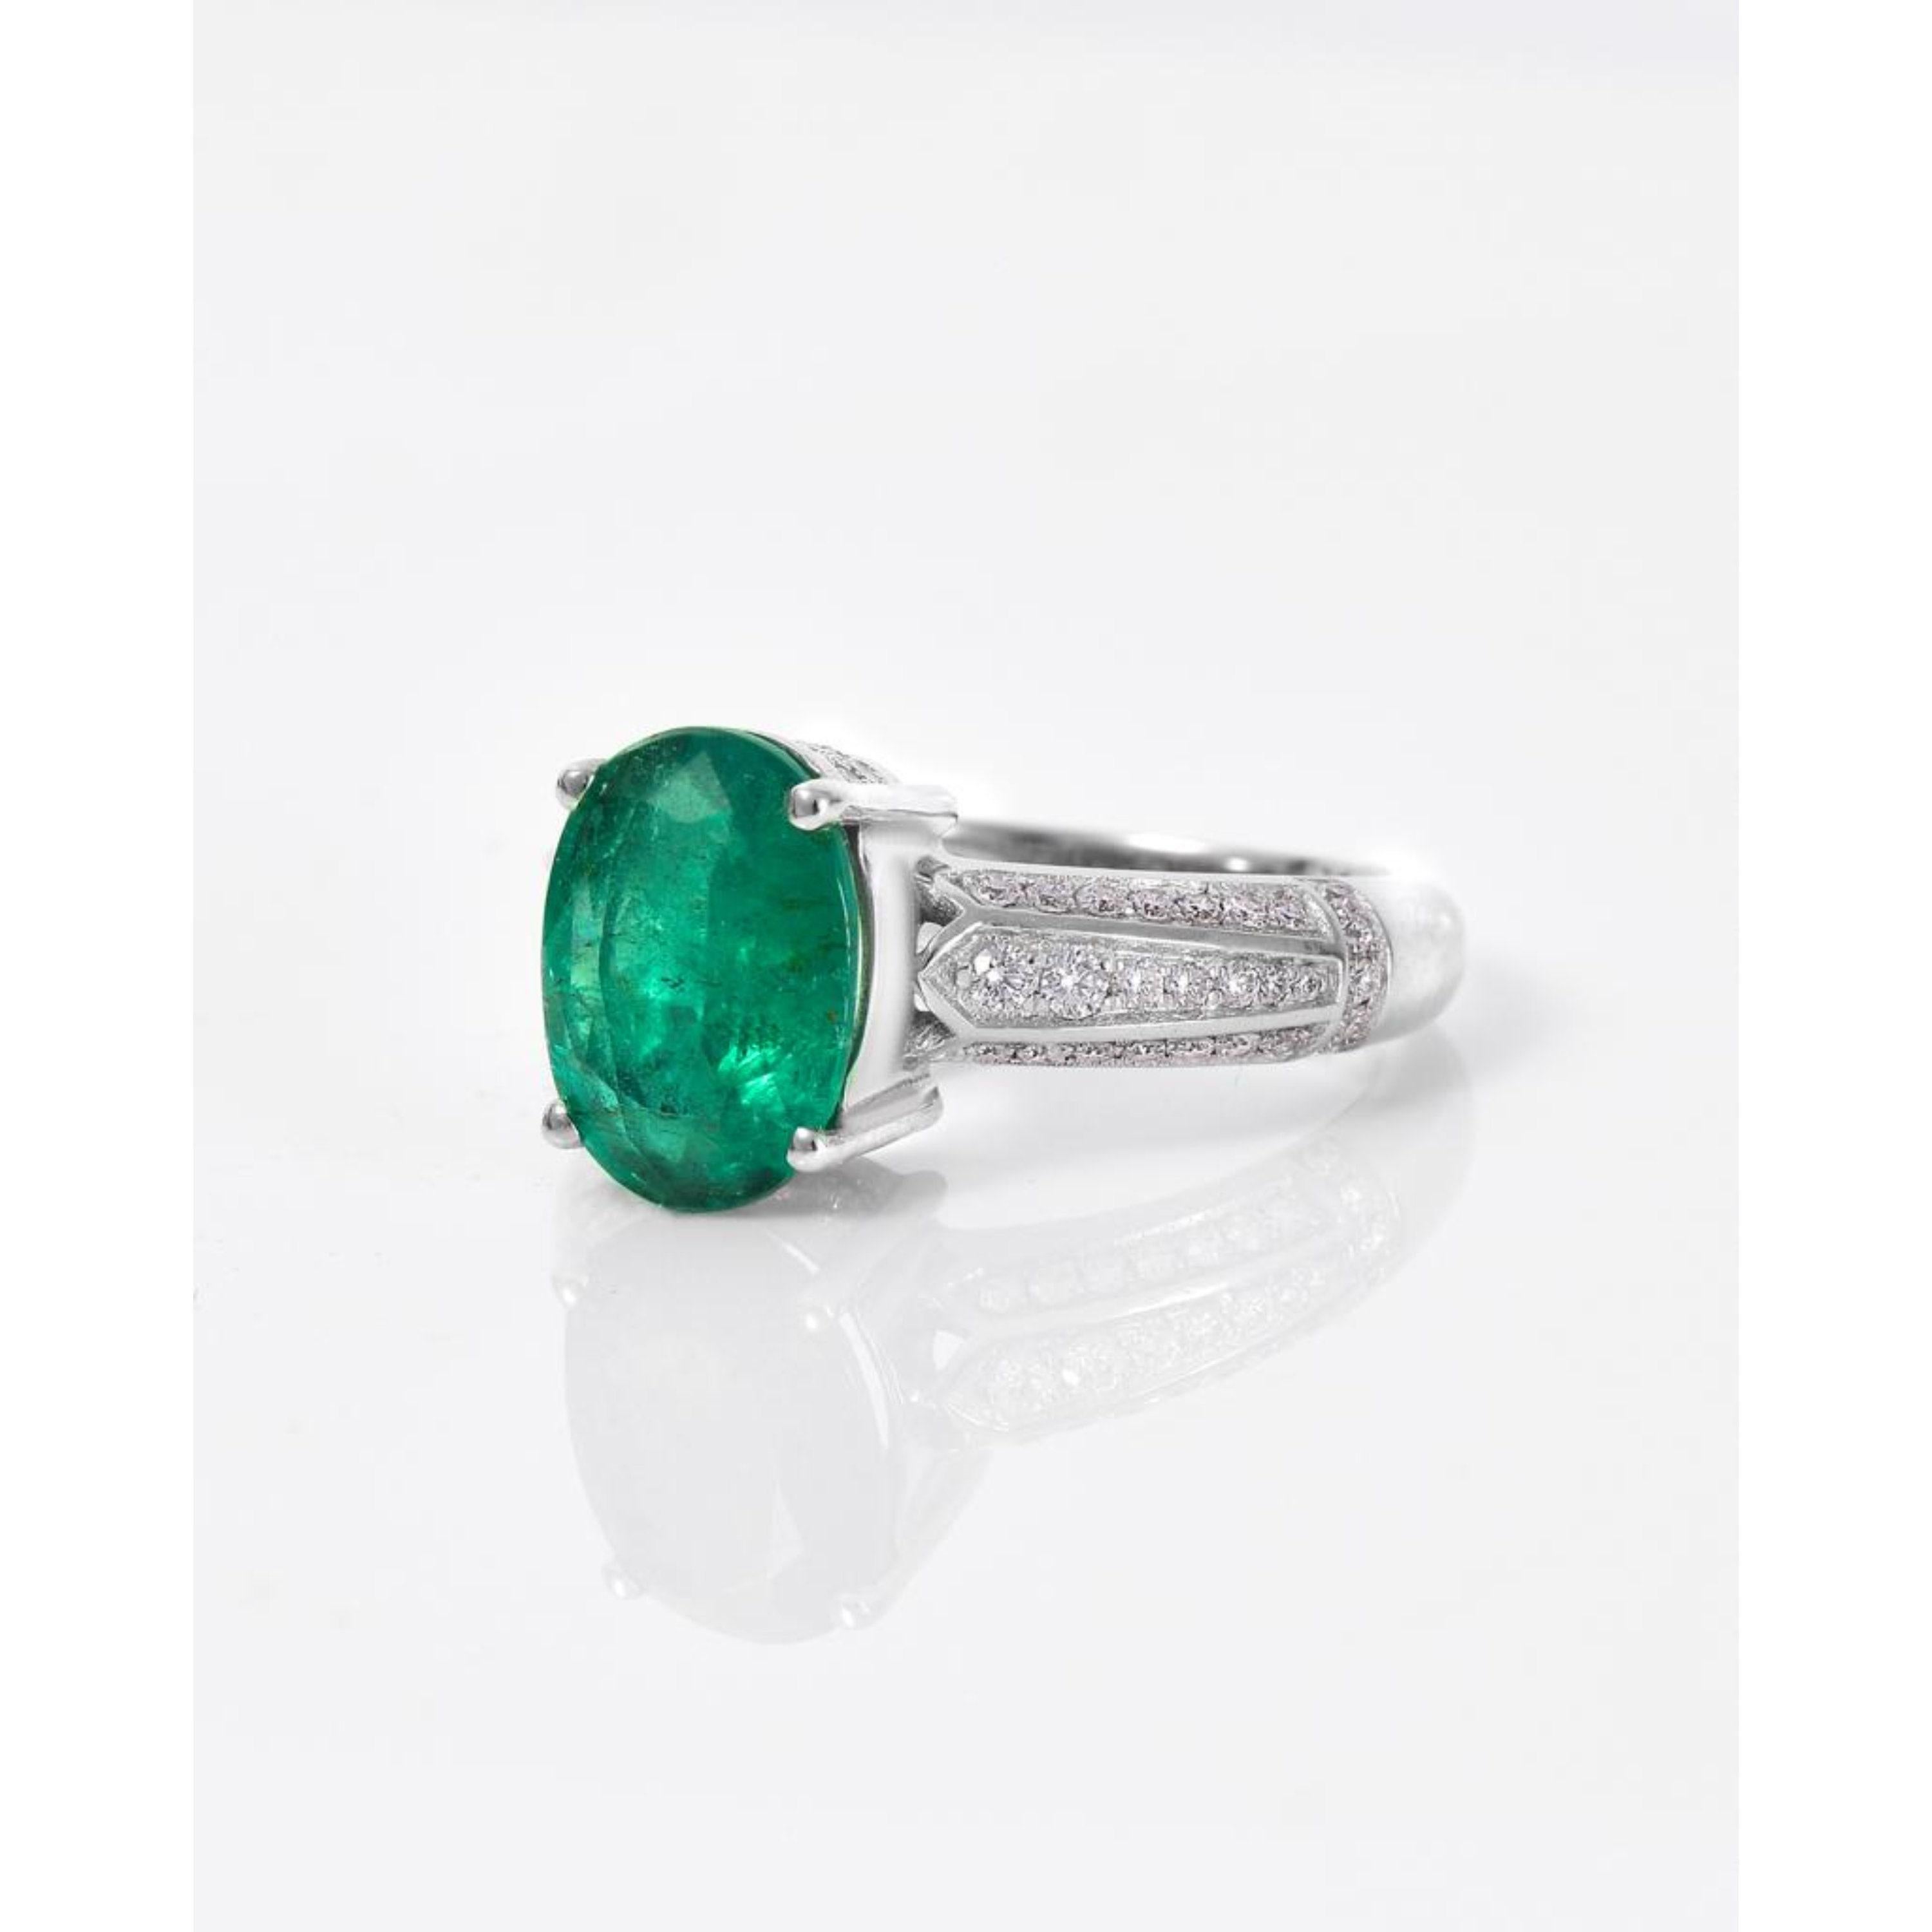 For Sale:  Unique 2 Carat Oval Cut Emerald Diamond Engagement Ring, Vintage White Gold Ring 7